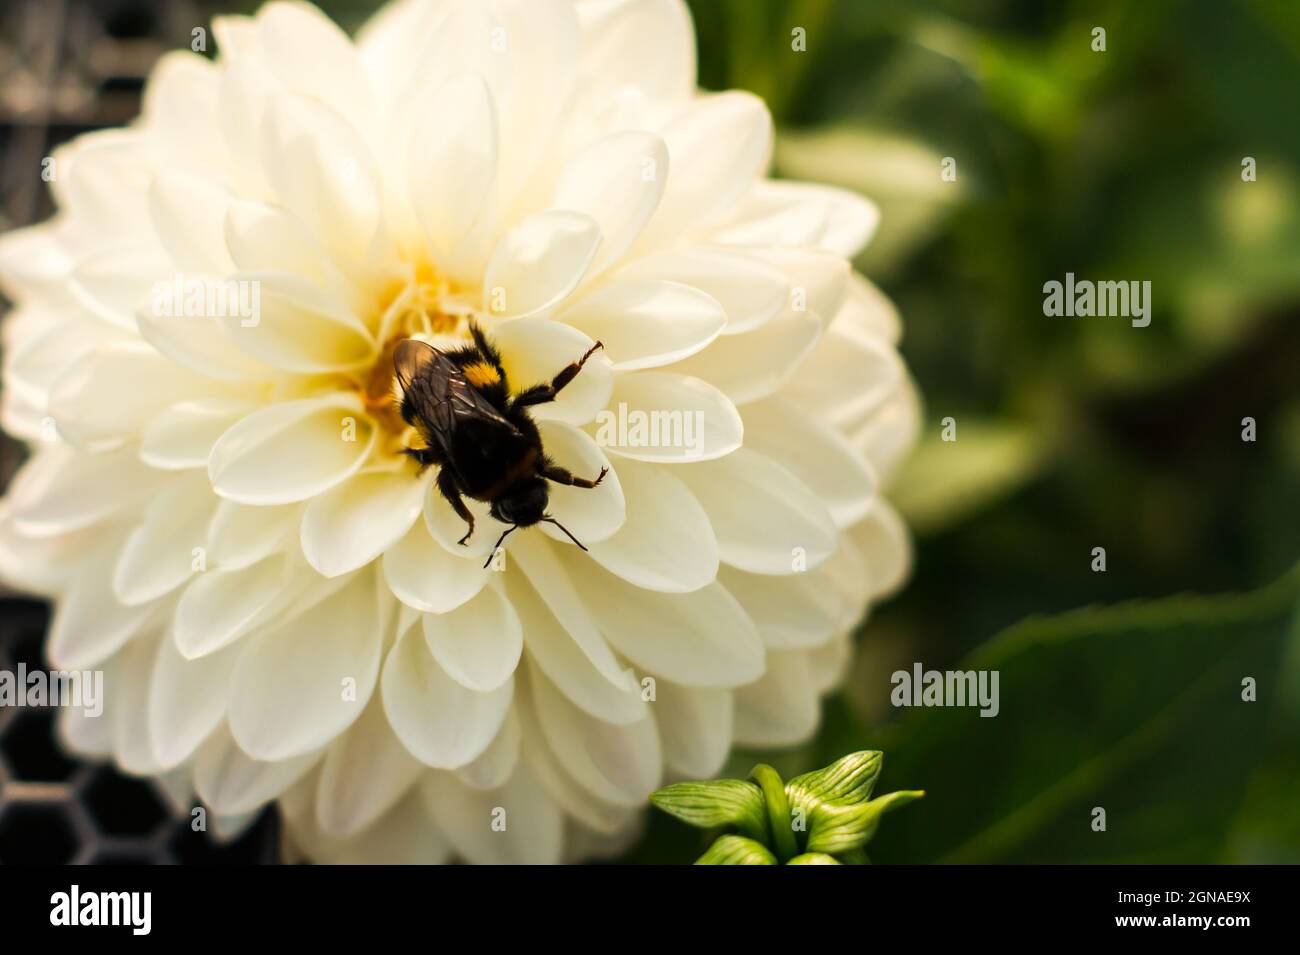 close-up of a flowering white delicate dahlia with a bumblebee in the center of the flower Stock Photo